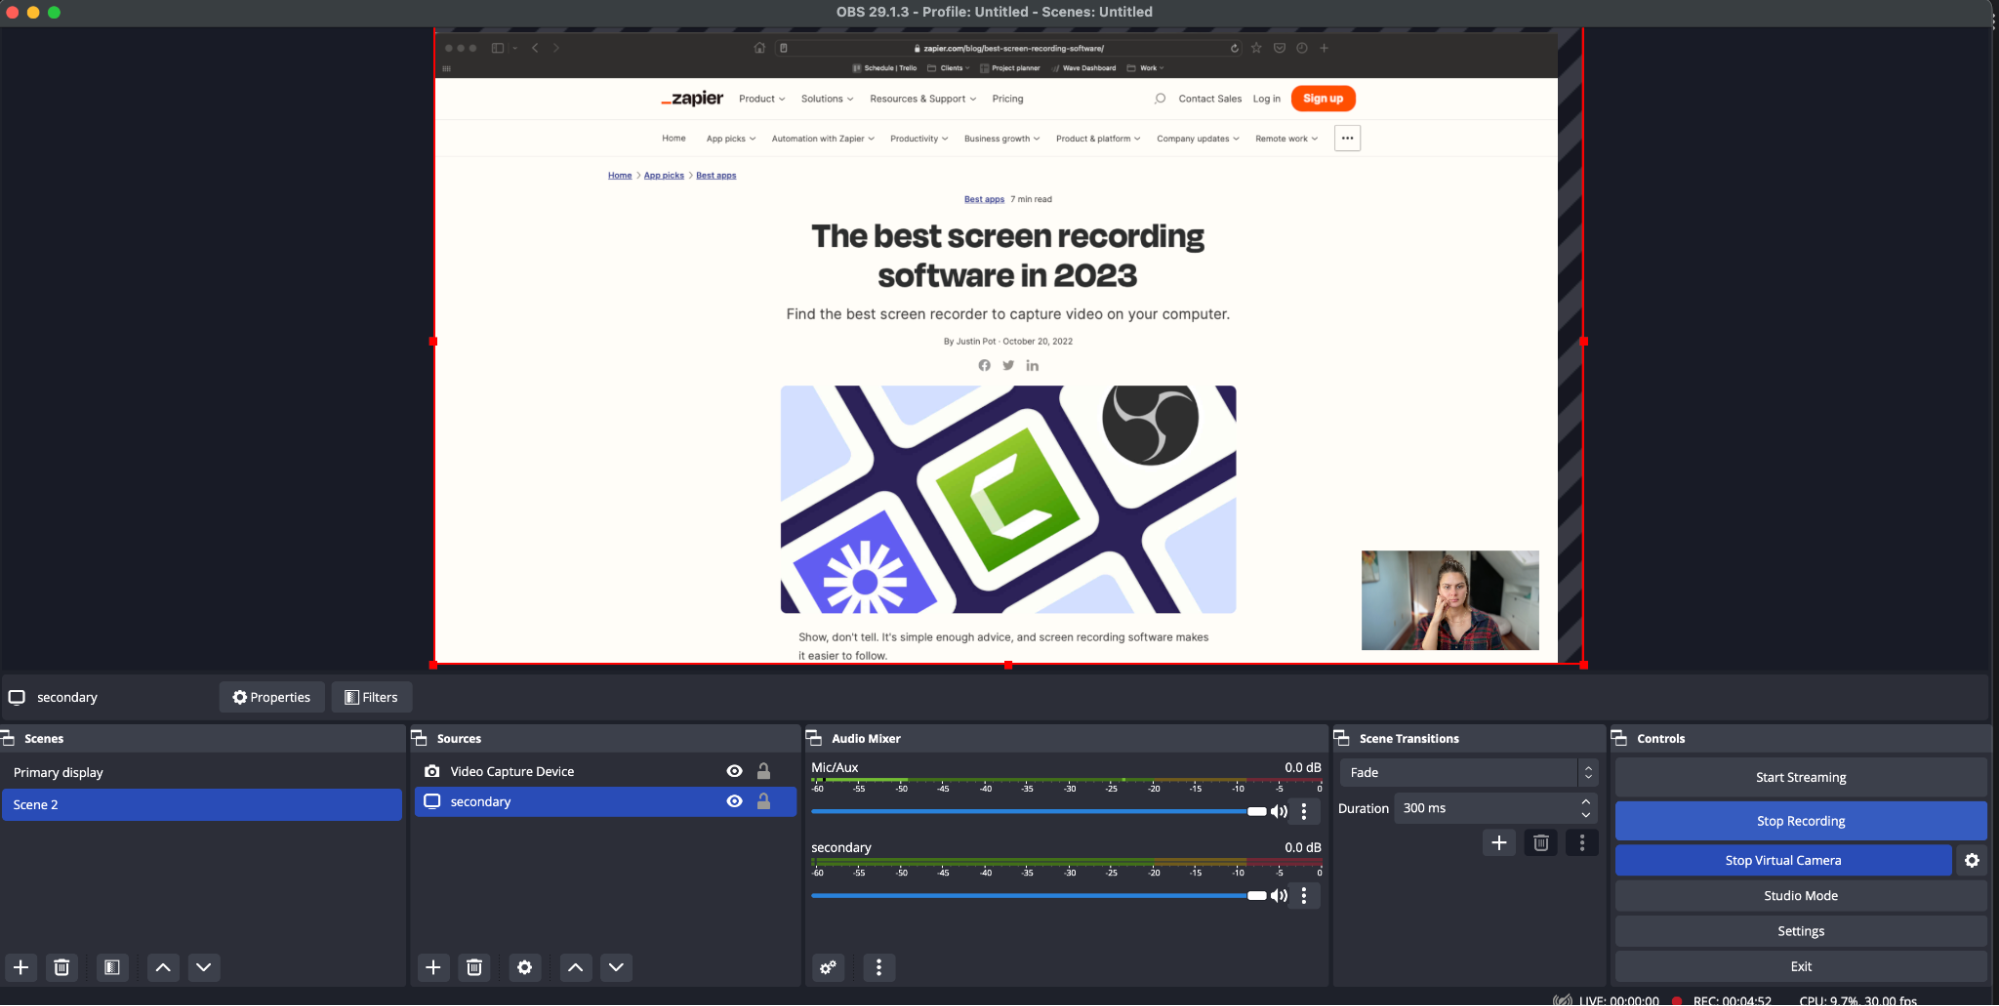 20+ Best Online Screen Recording Software For Founders